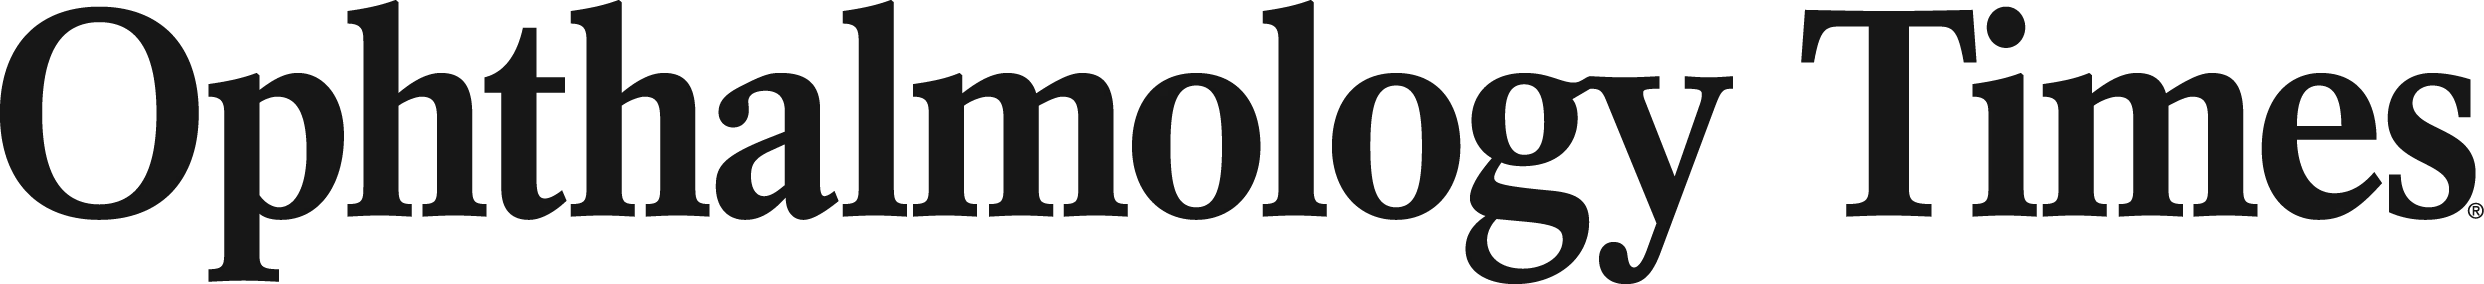 The Image Is Of The &Quot;Ophthalmology Times&Quot; Logo, Featuring The Publication'S Name Written In A Sophisticated Serif Font, With Nidek Subtly Incorporated Into The Backdrop.